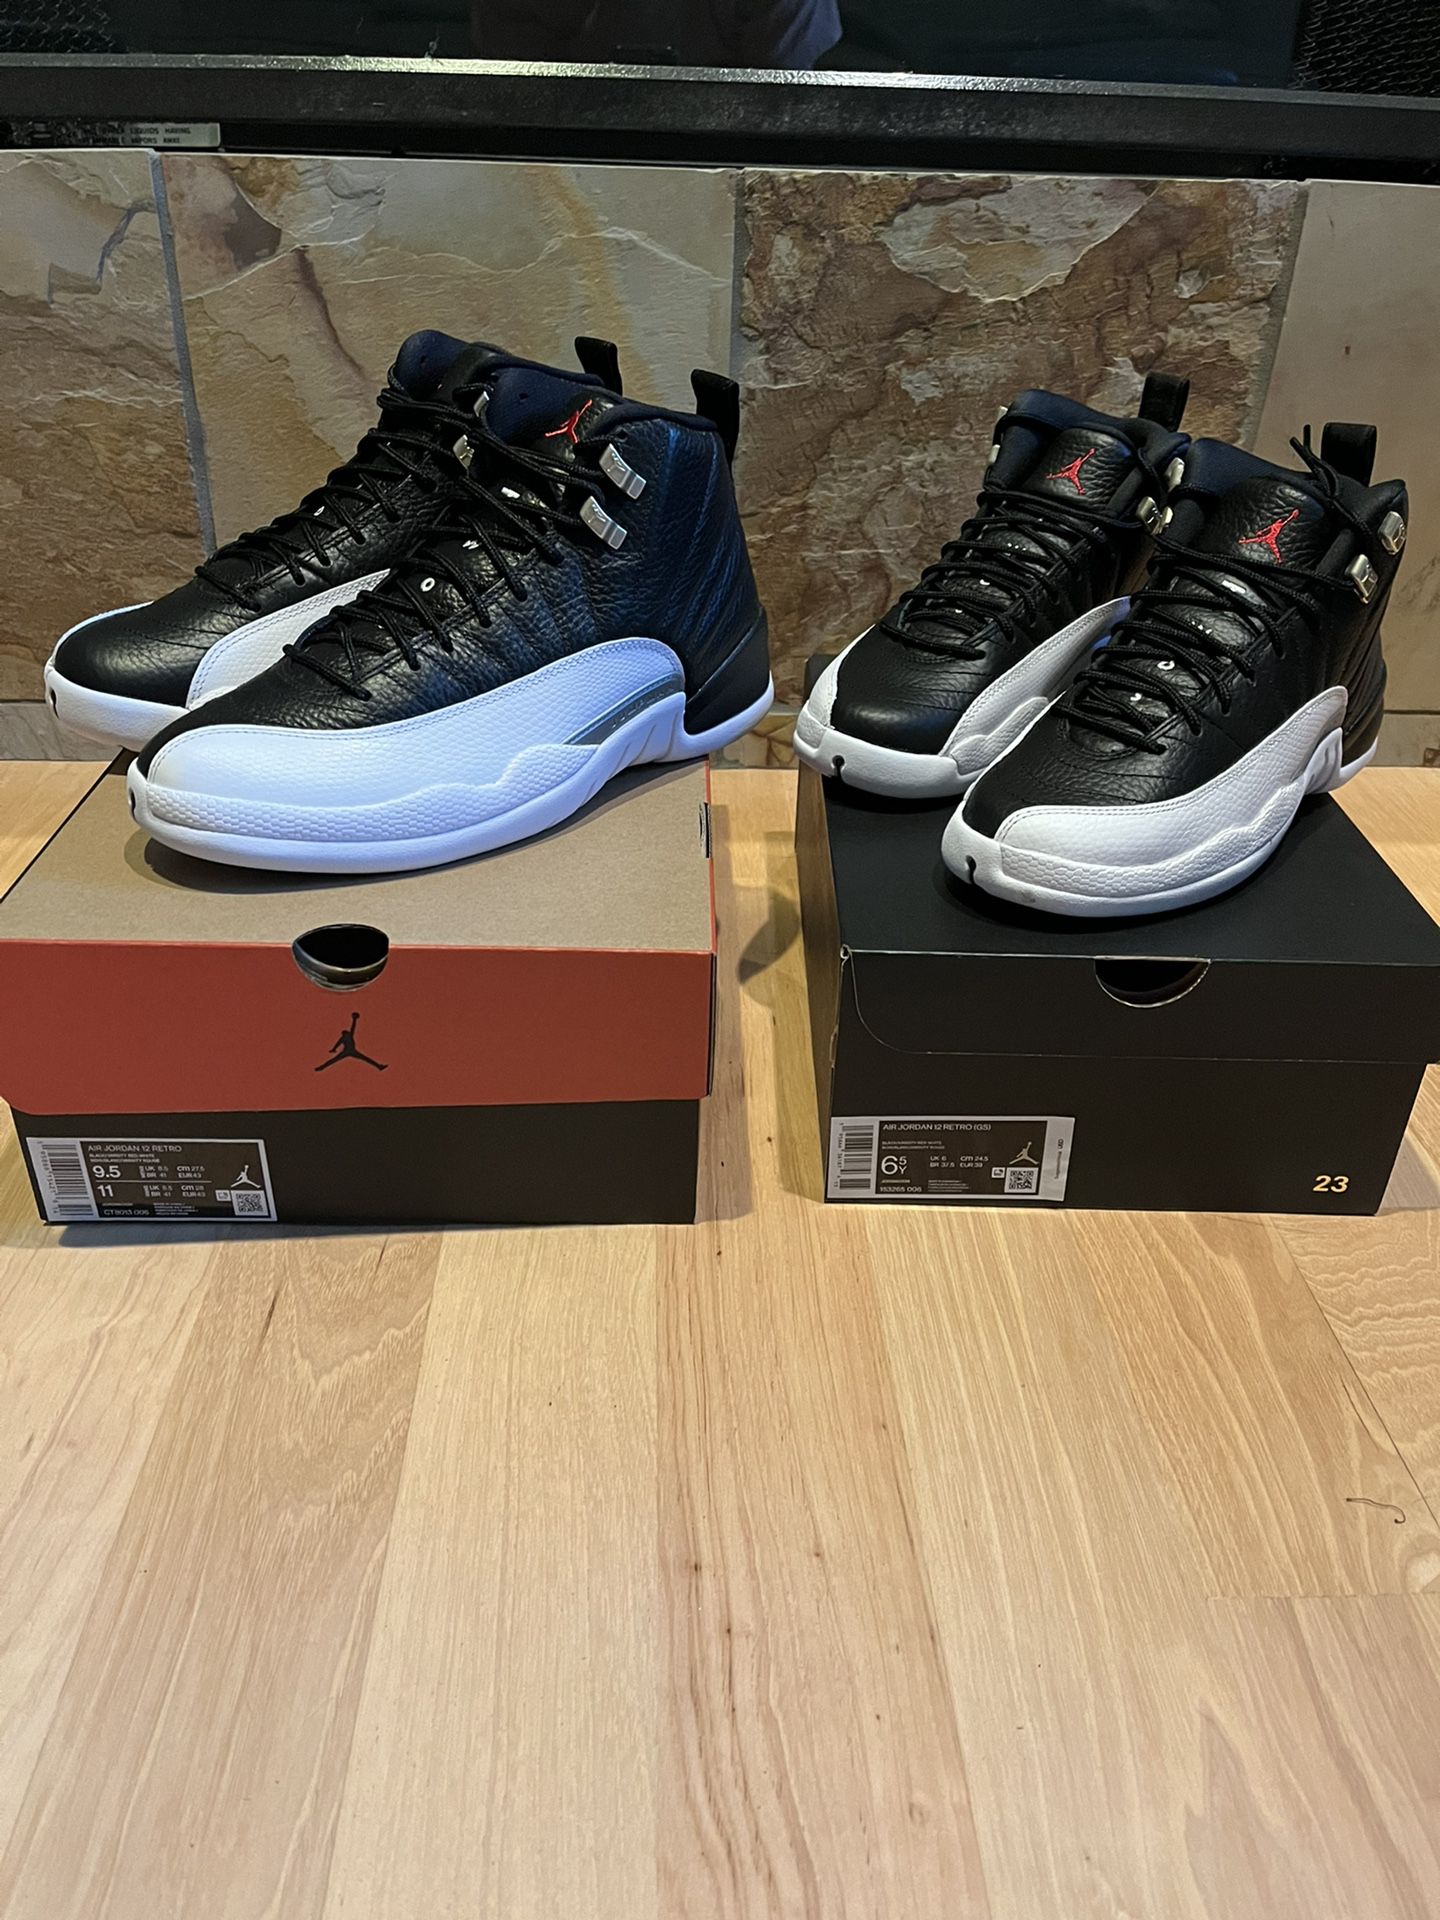 Air Jordan 12 Retro Playoffs Sizes 9.5 and 6.5y, new with box